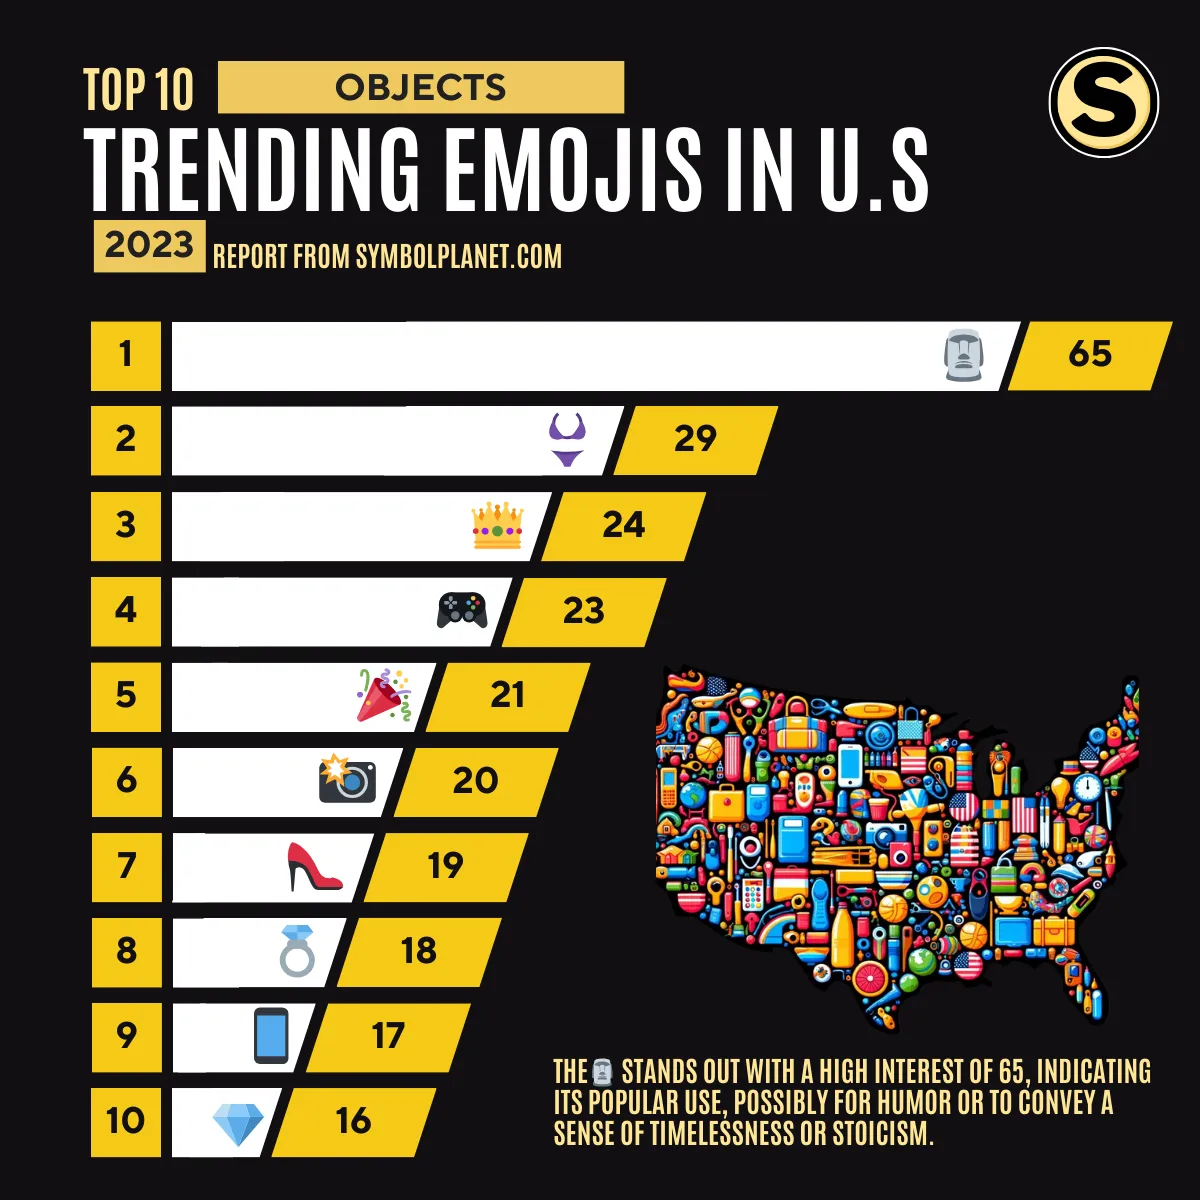 Top 10 Trending (Objects) Emojis of 2023 in the United States